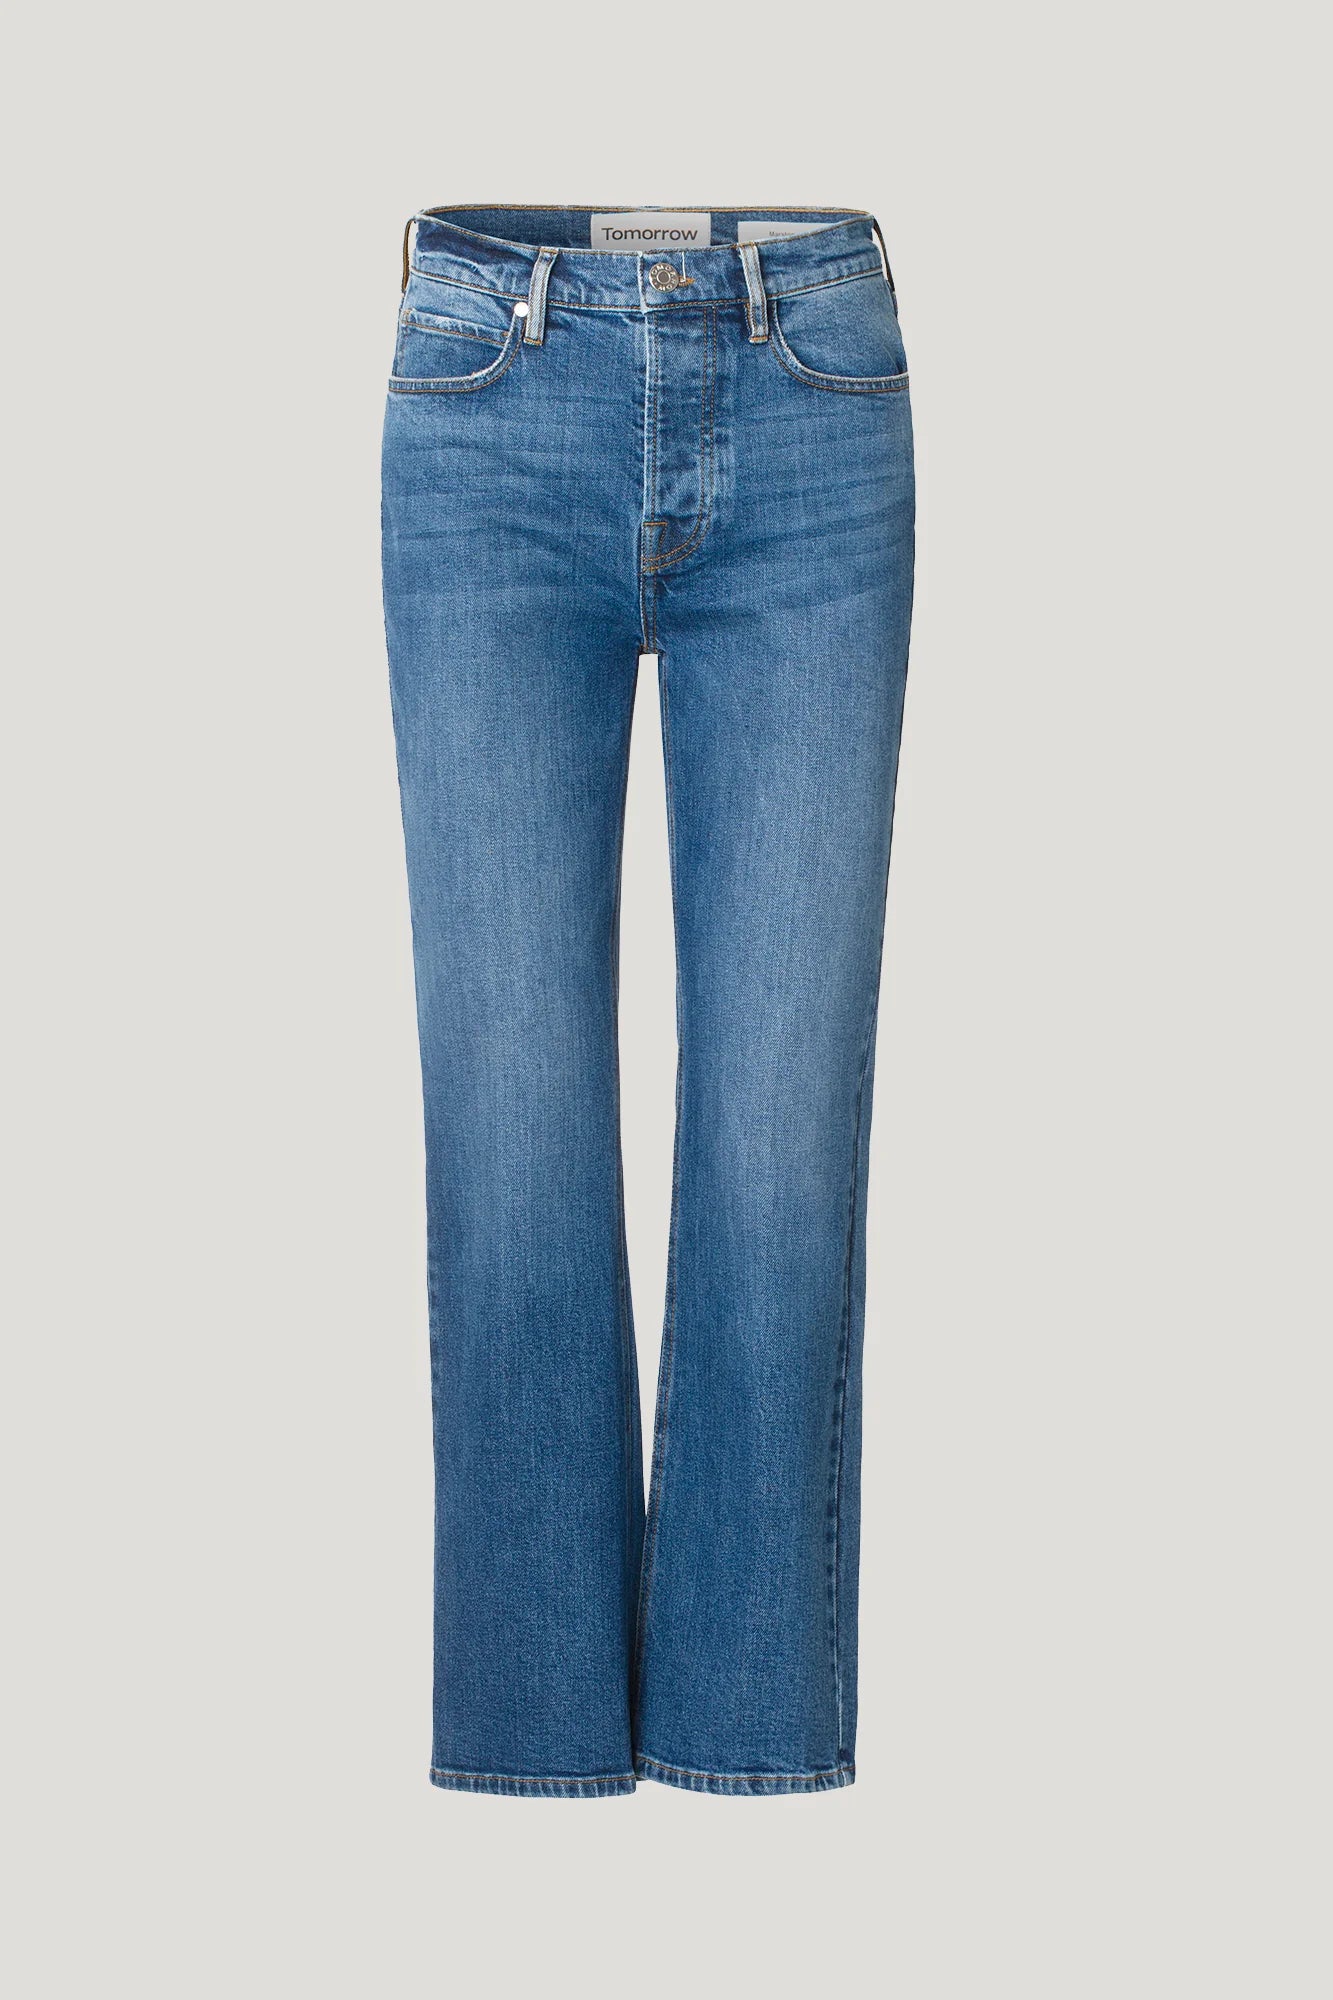 A woman's Marston Jeans - Key West, straight leg jeans in blue denim made from organic cotton by Tomorrow Denim.